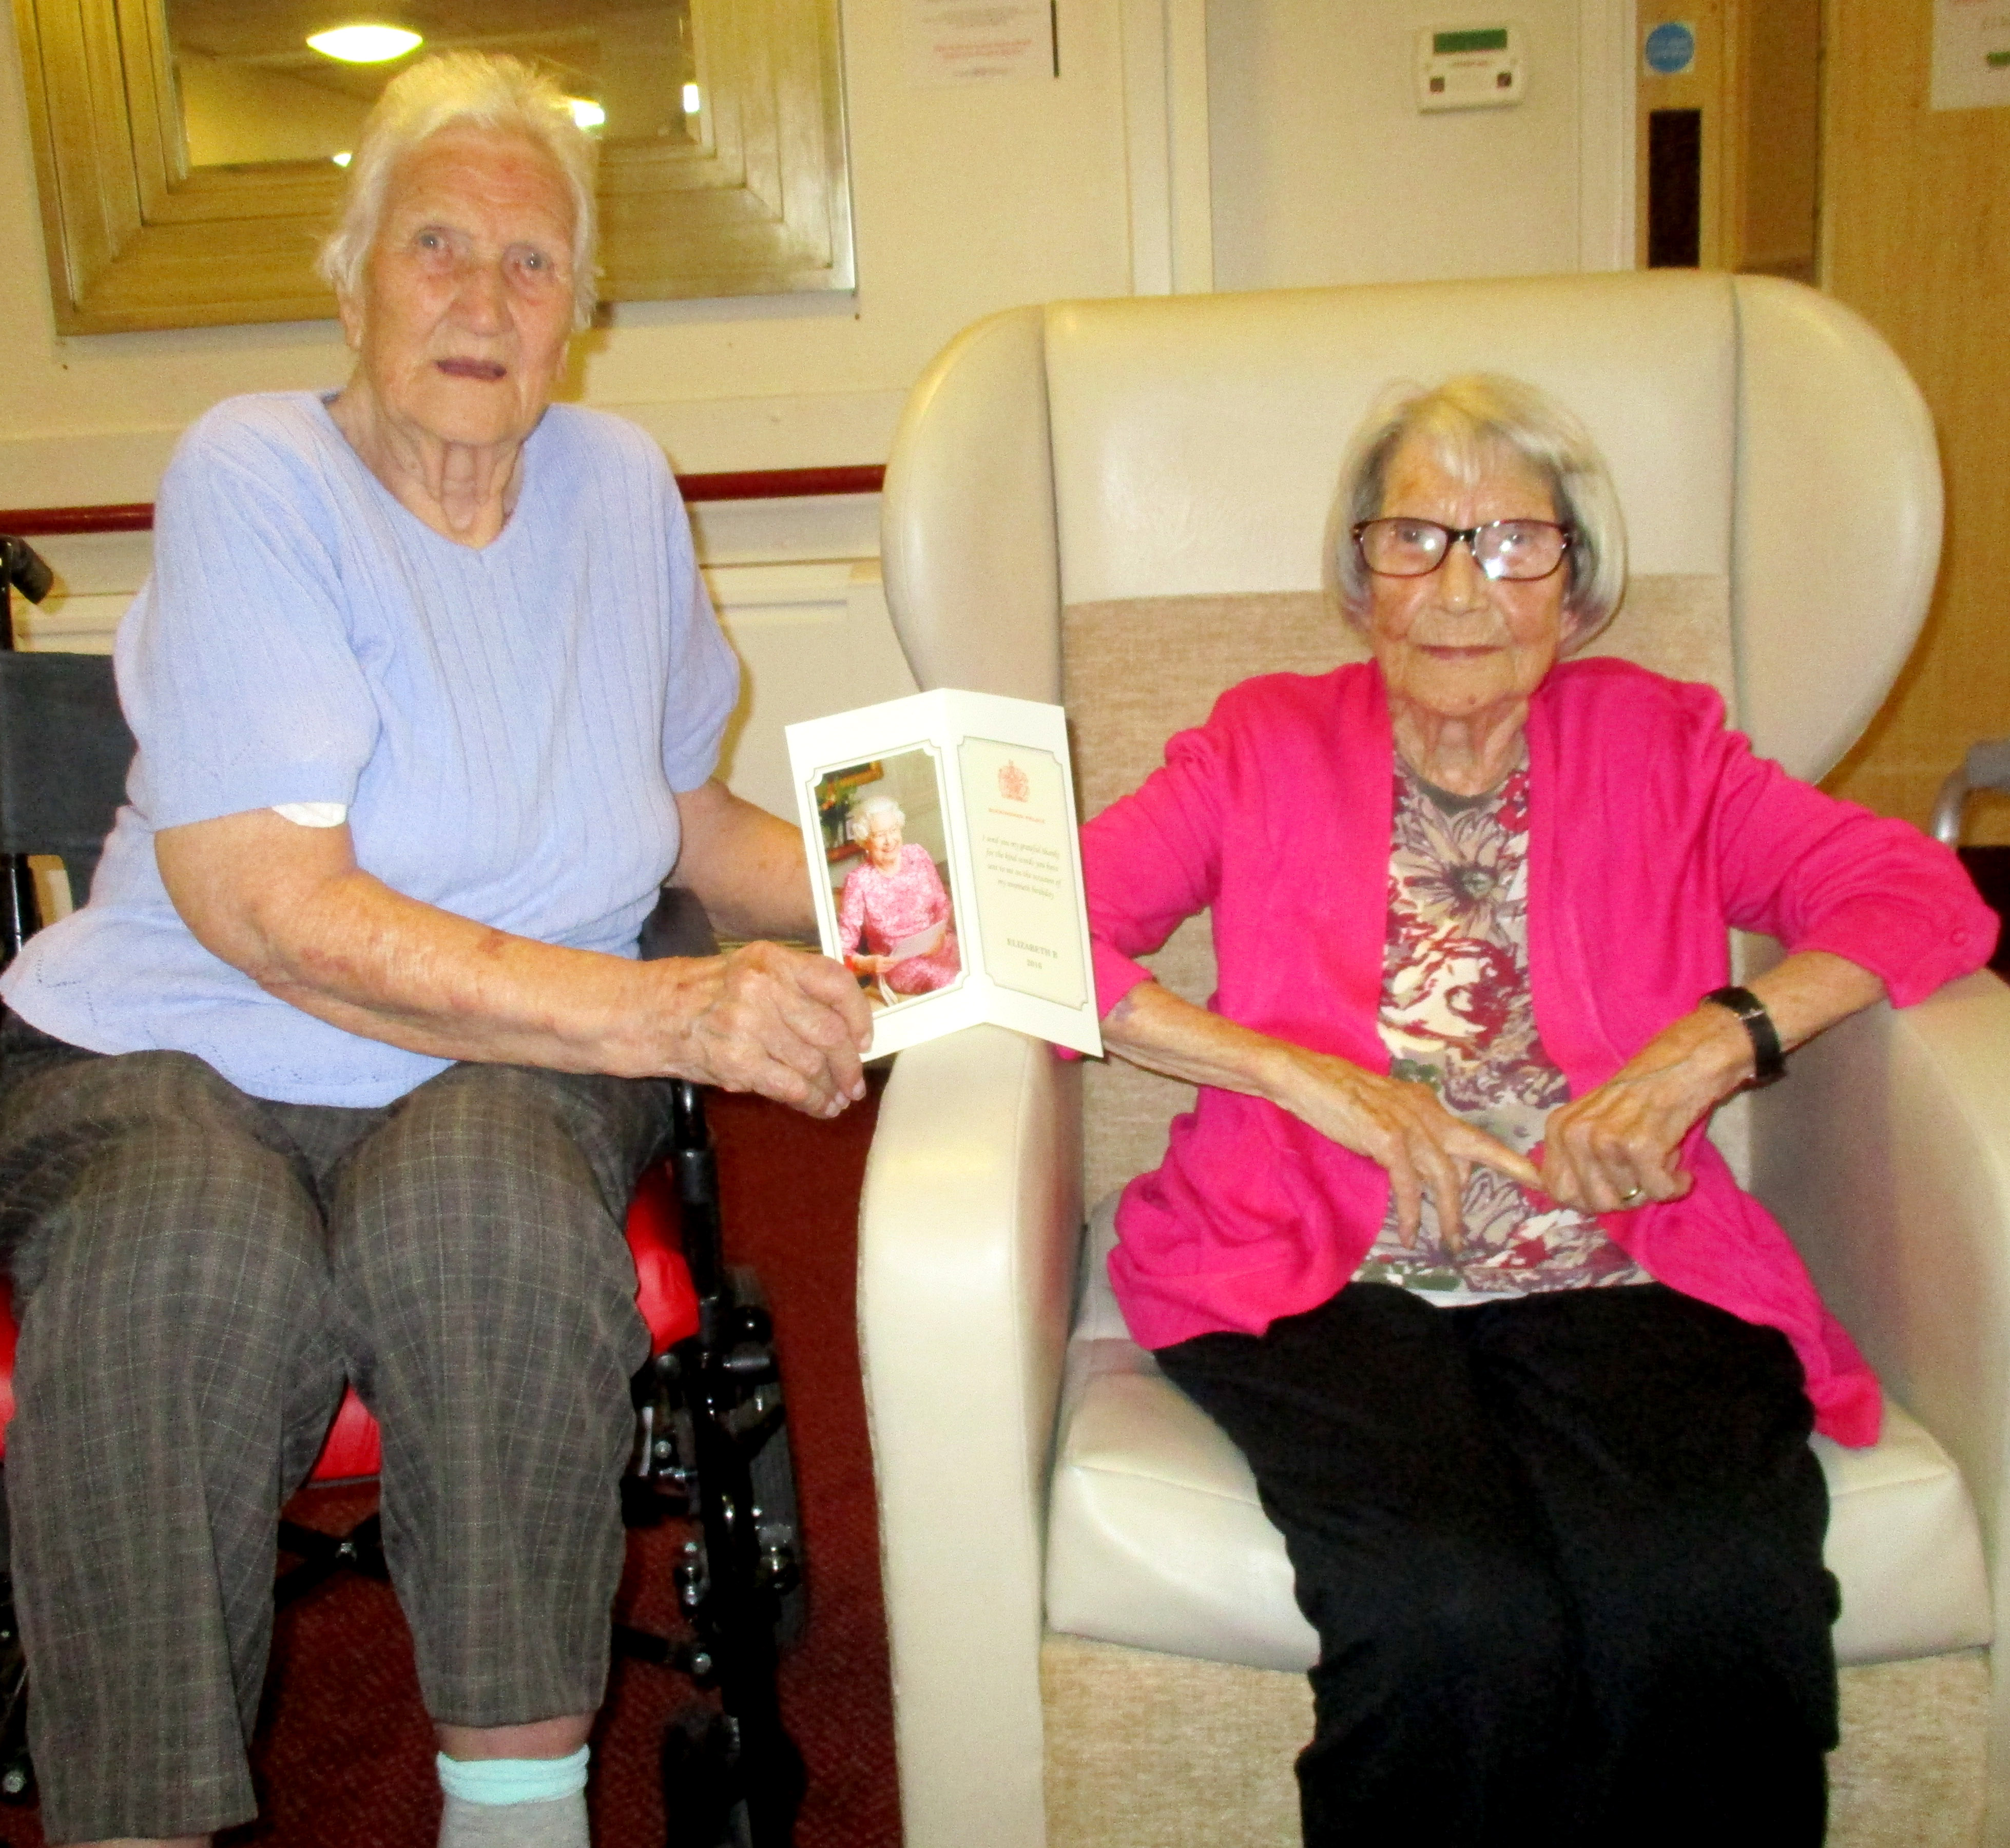 Royal Thanks to Care Home Residents